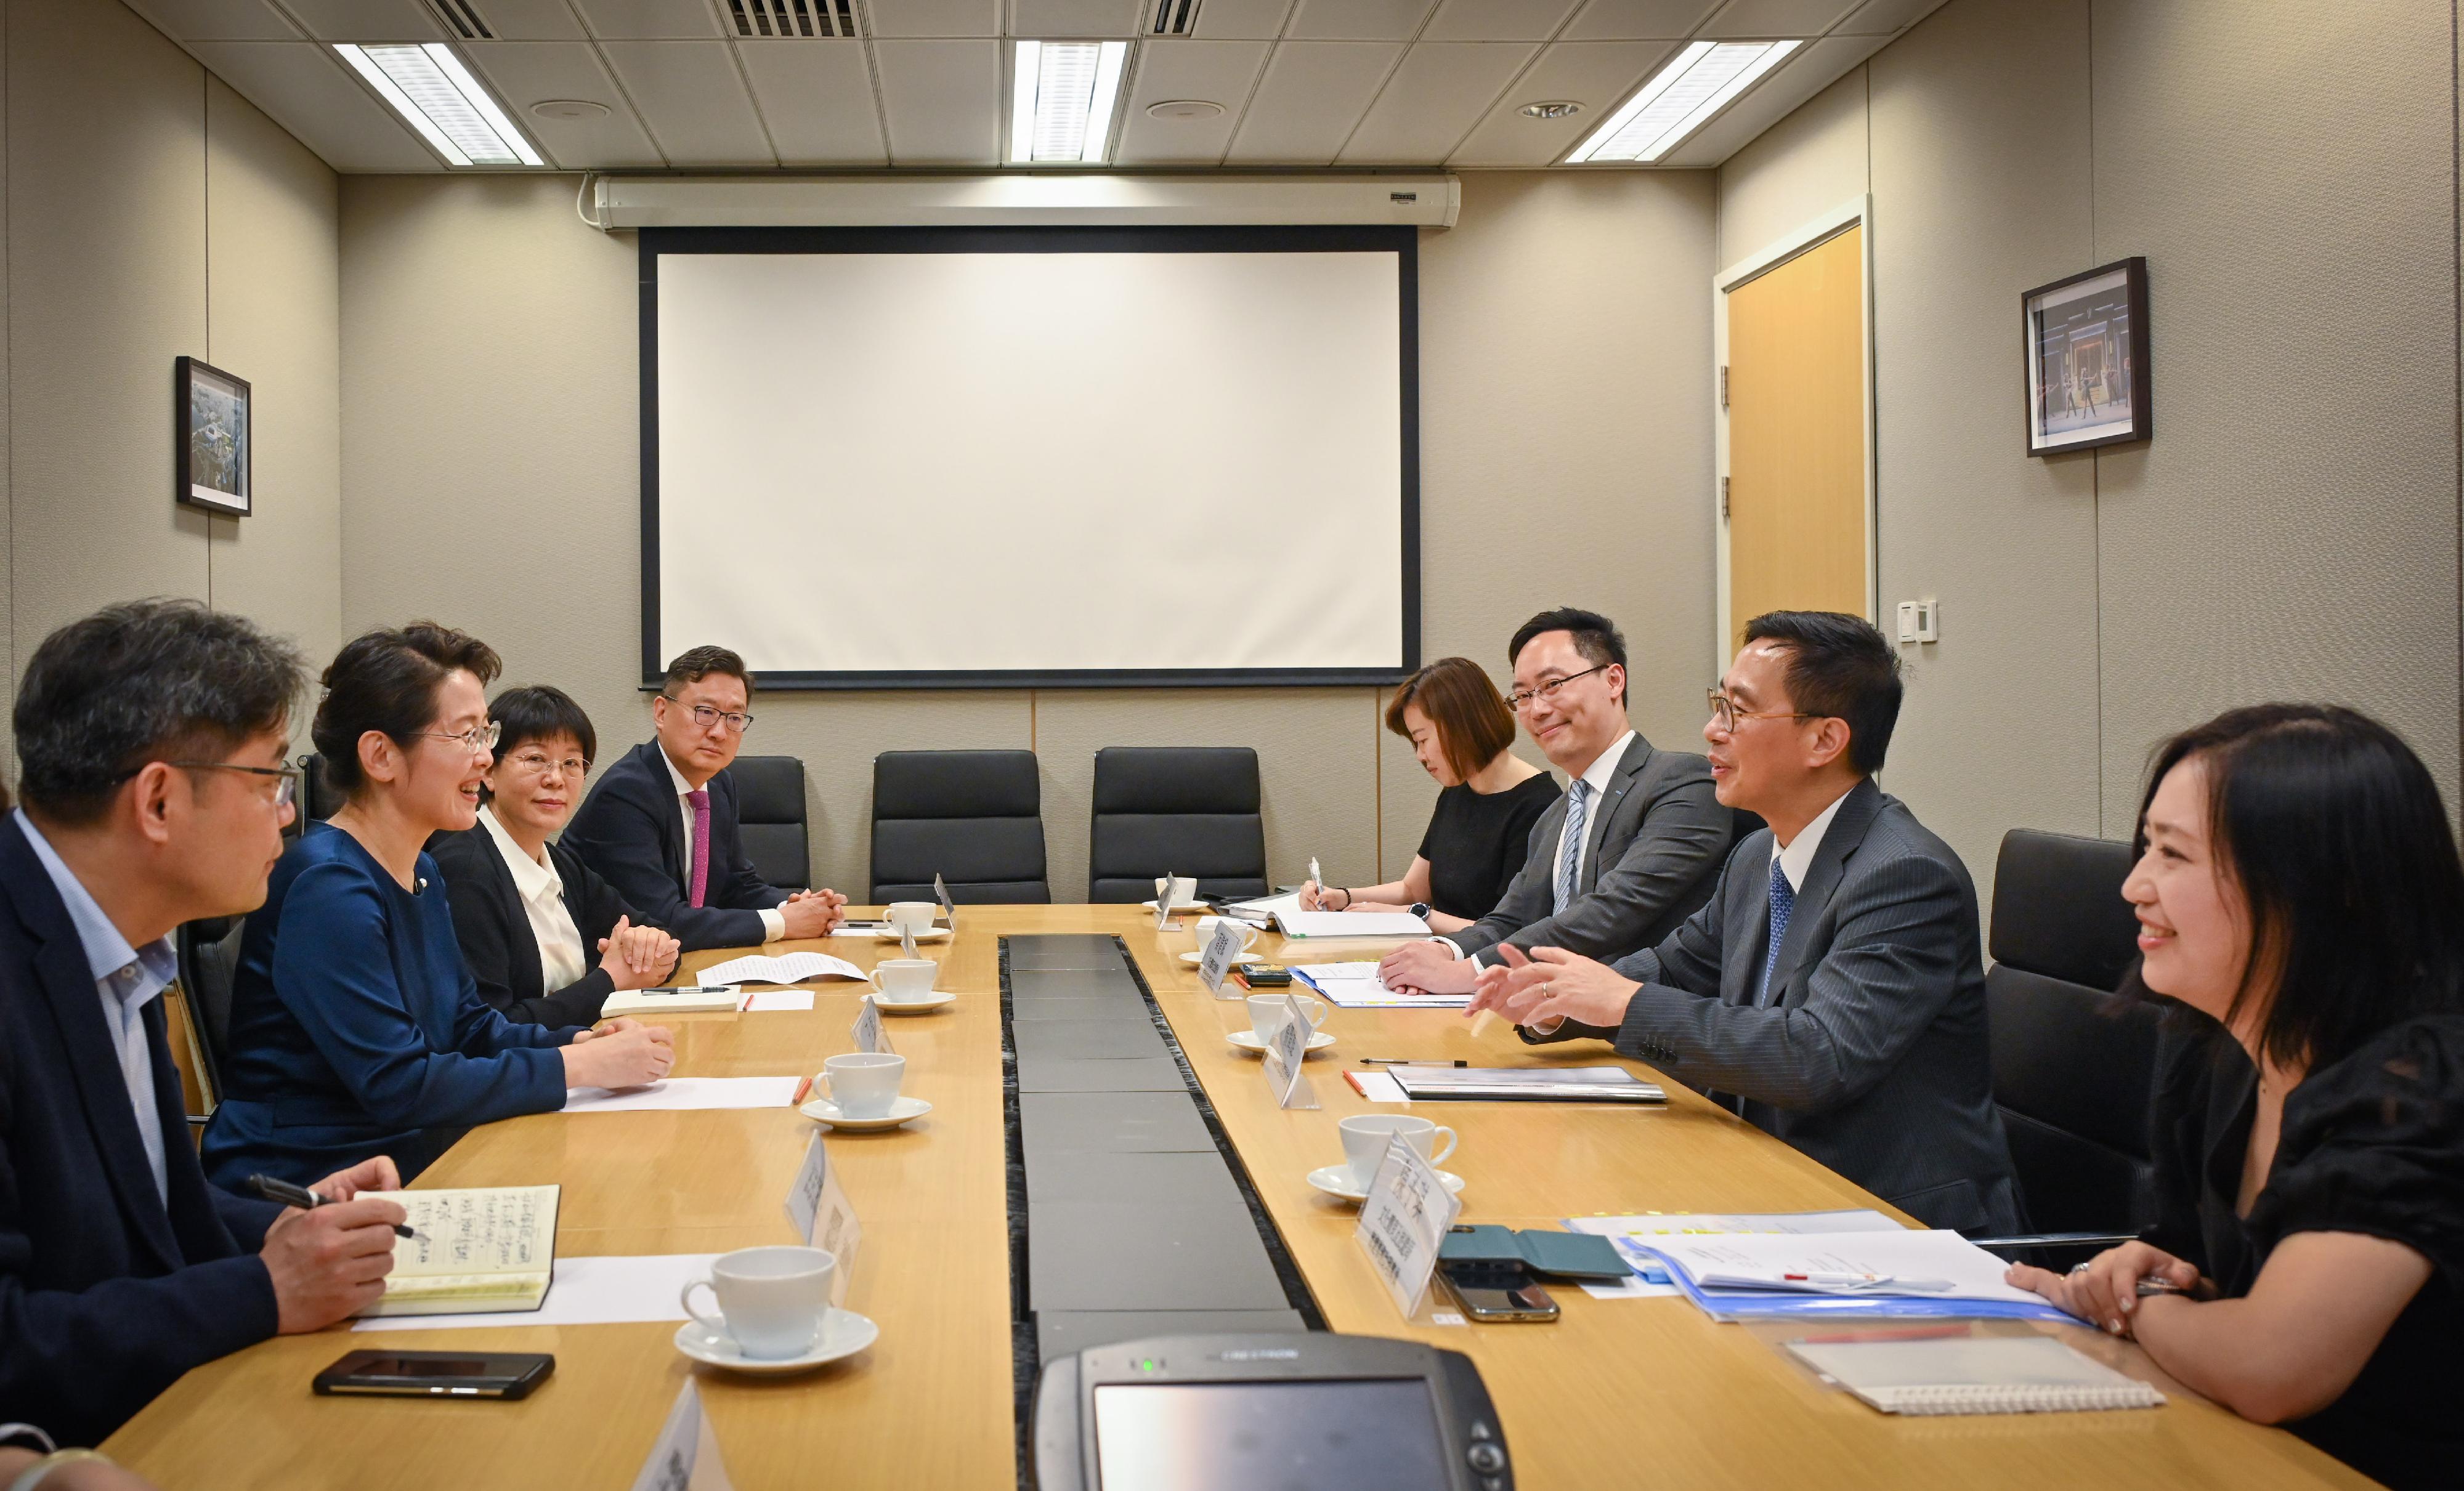 The Secretary for Culture, Sports and Tourism, Mr Kevin Yeung (second right), today (May 30) met with the Director-General of Shandong Provincial Department of Culture and Tourism, Ms Wang Lei (second left). Photo shows officials exchanging views on issues including deepening co-operation between Hong Kong and Shandong on cultural and tourism fronts.